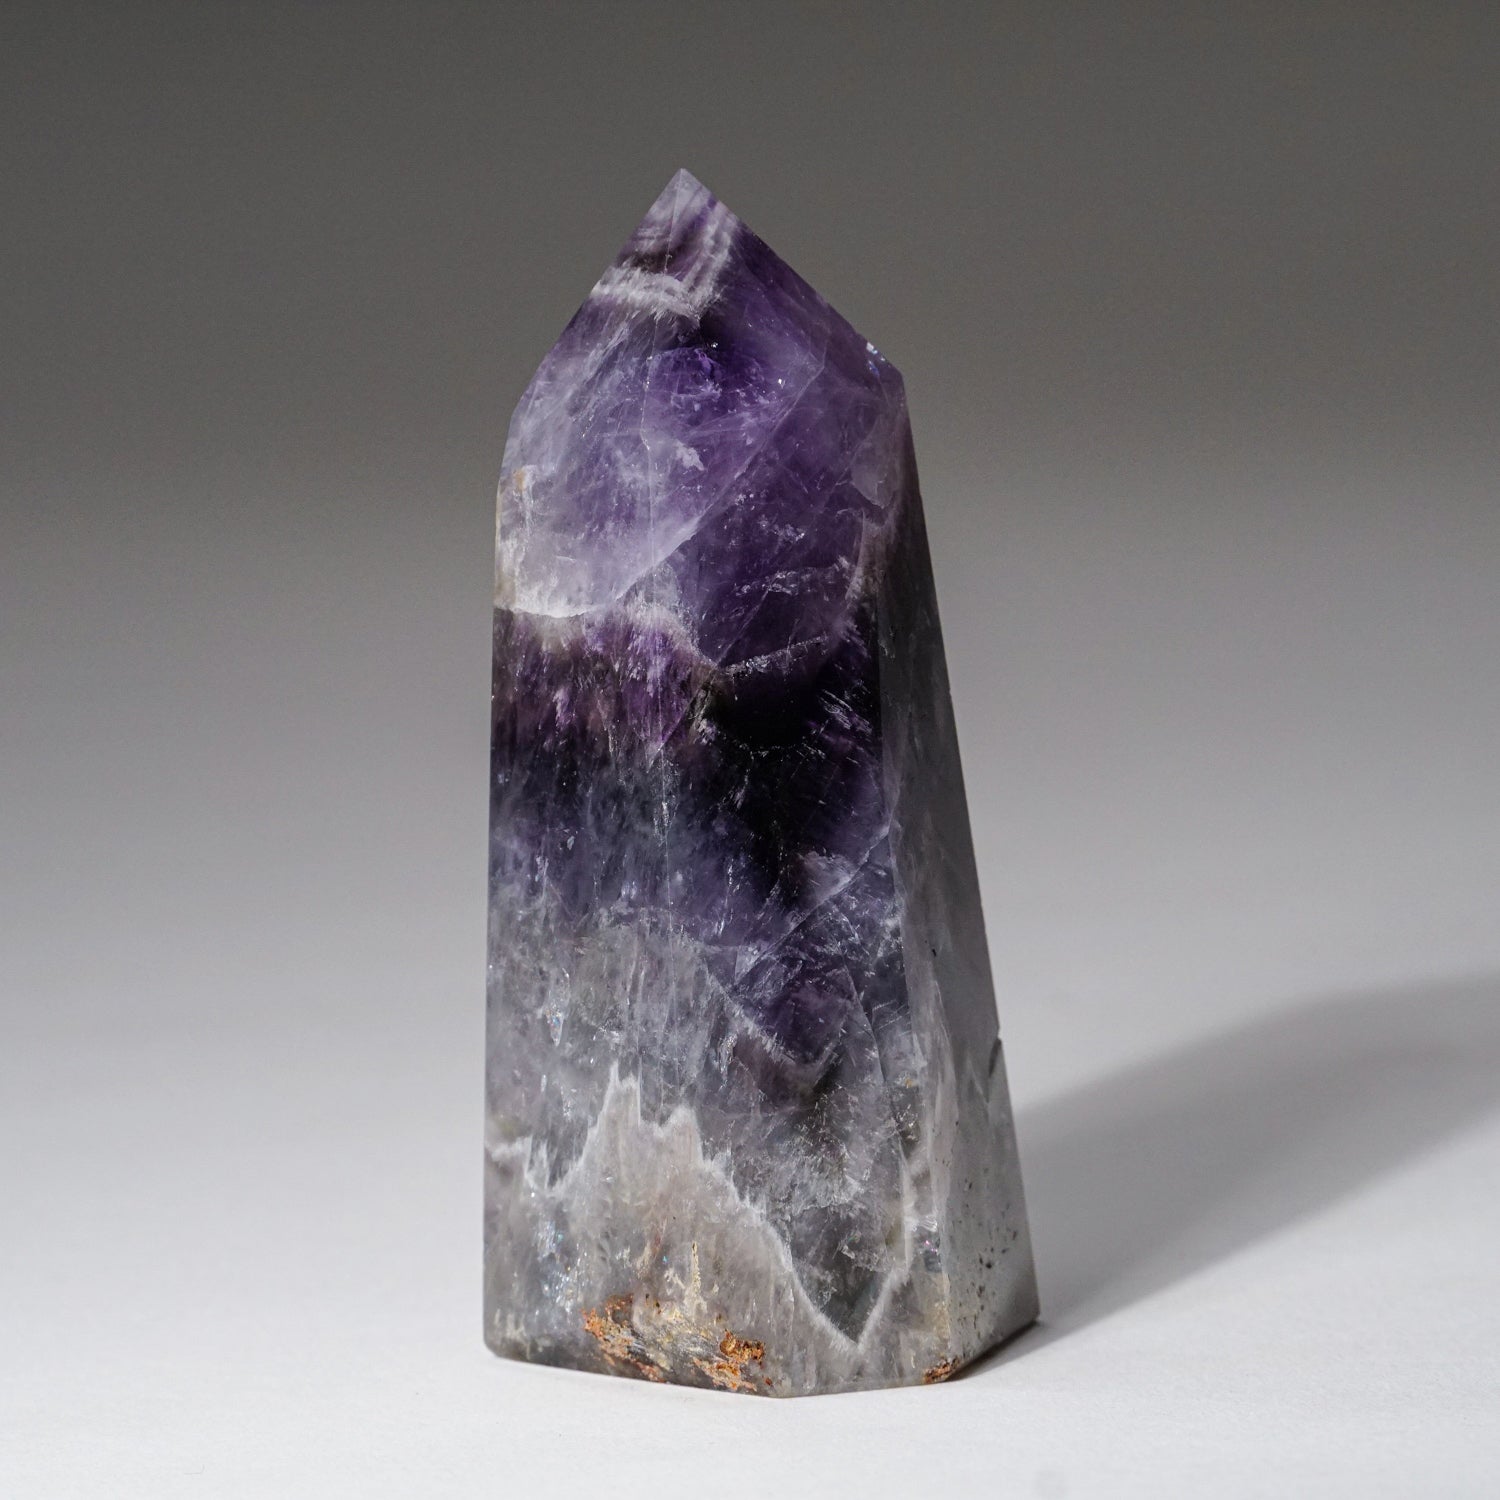 Polished Chevron Amethyst Point from Brazil (135.8 grams)